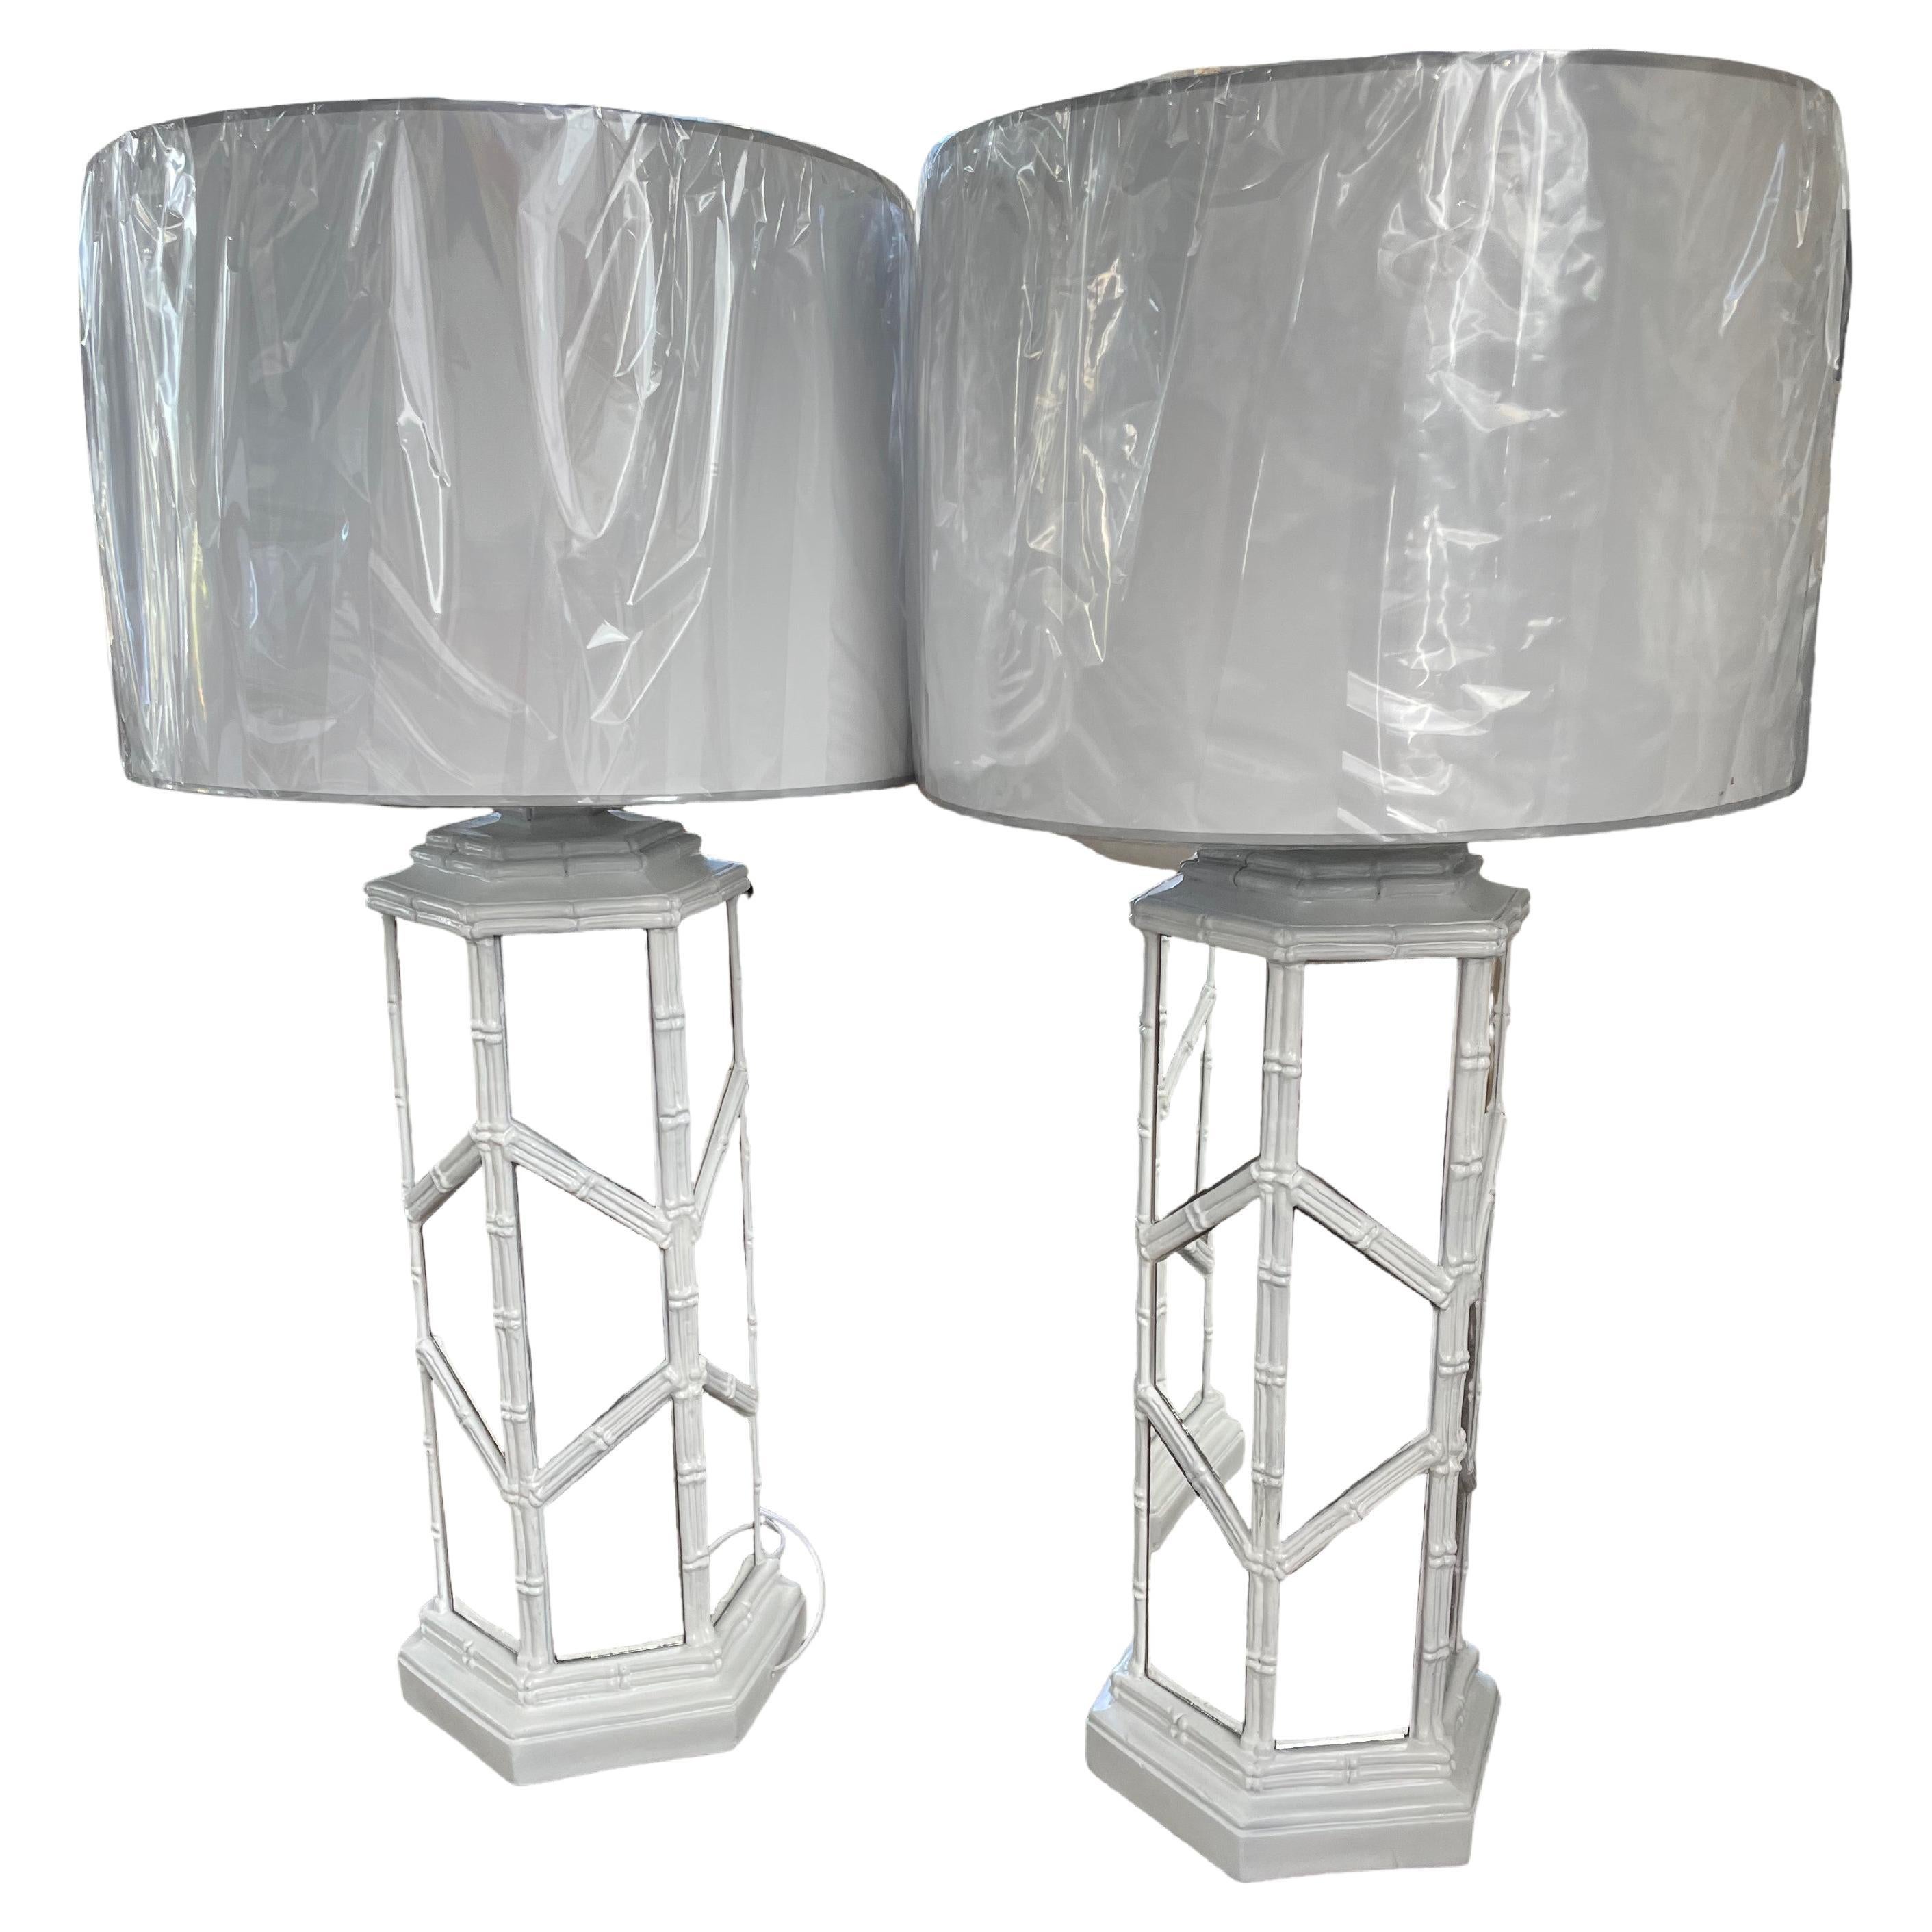 Pair of Stunning Vintage Faux Bamboo Vintage Mirrored Lamps For Sale